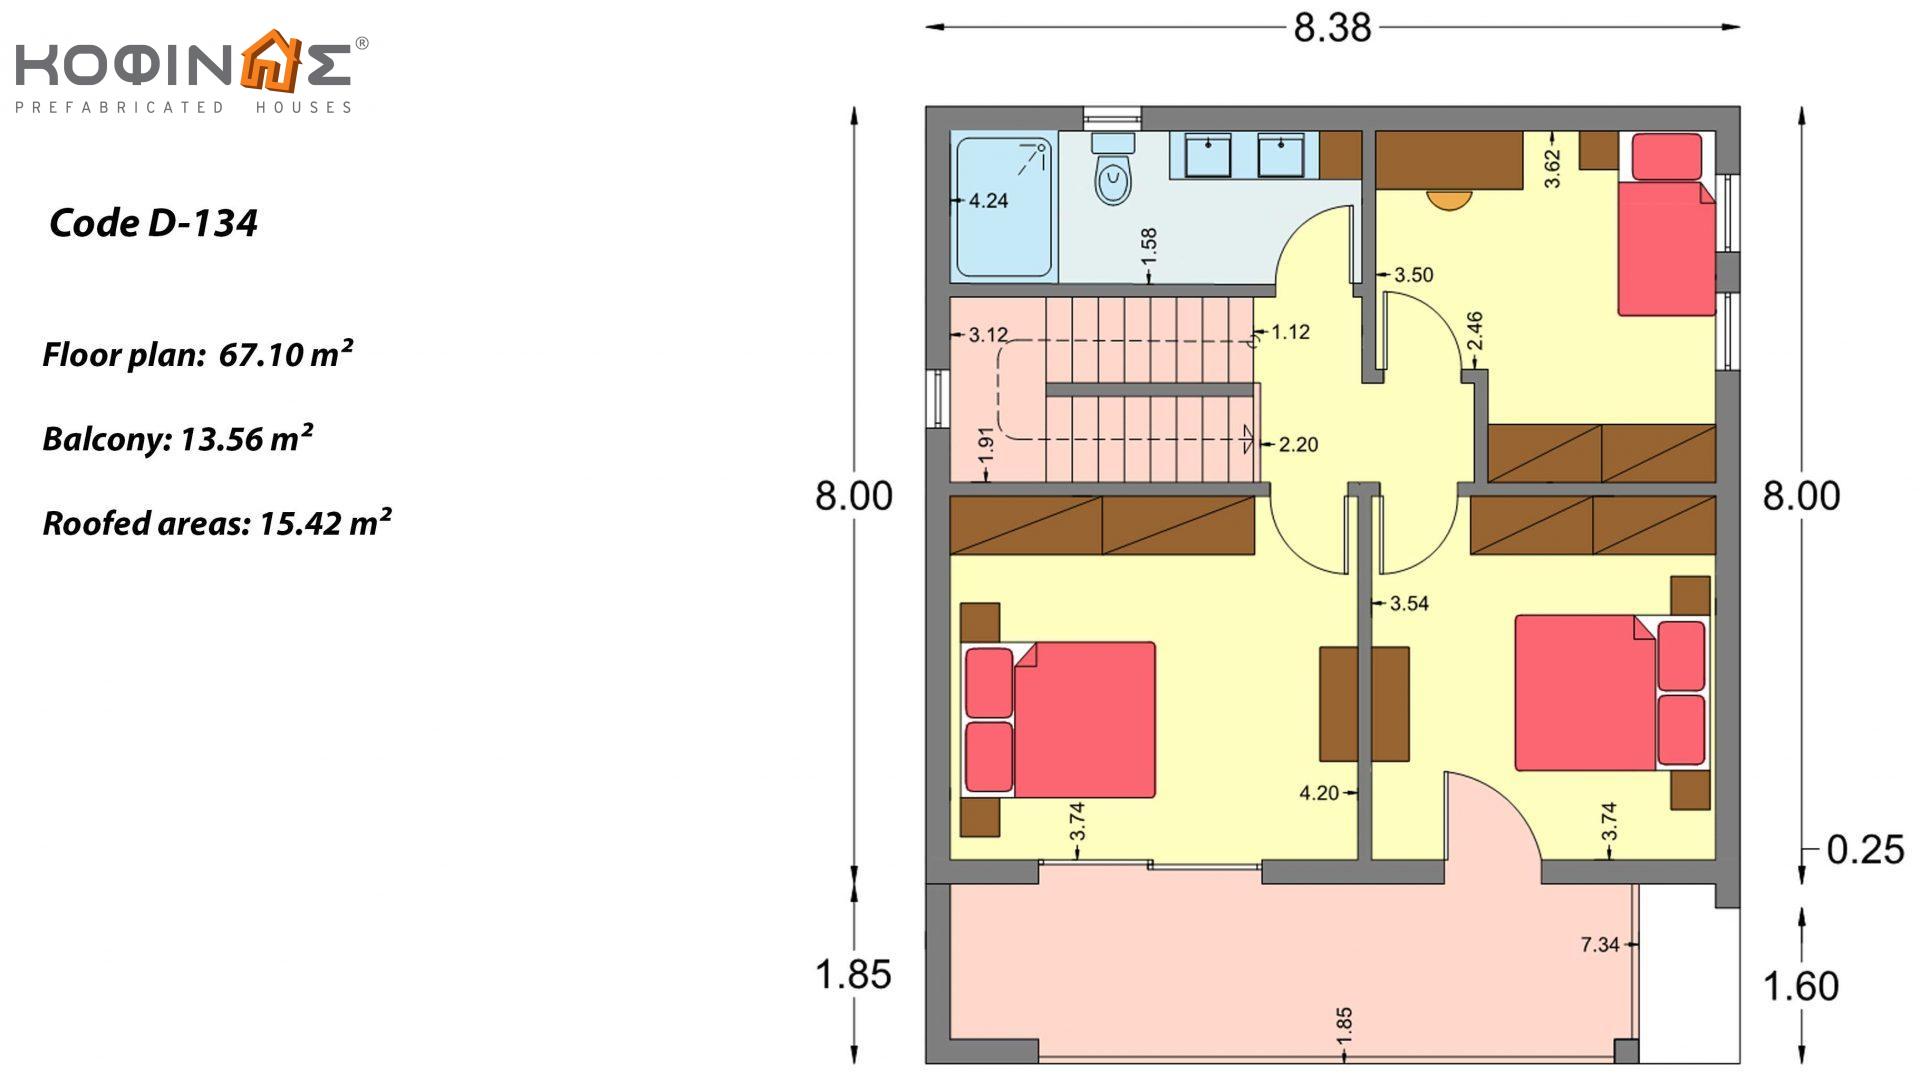 2-story house D-134, total surface of  134,26 m², roofed areas 31,28 m², balconies13,56 m²